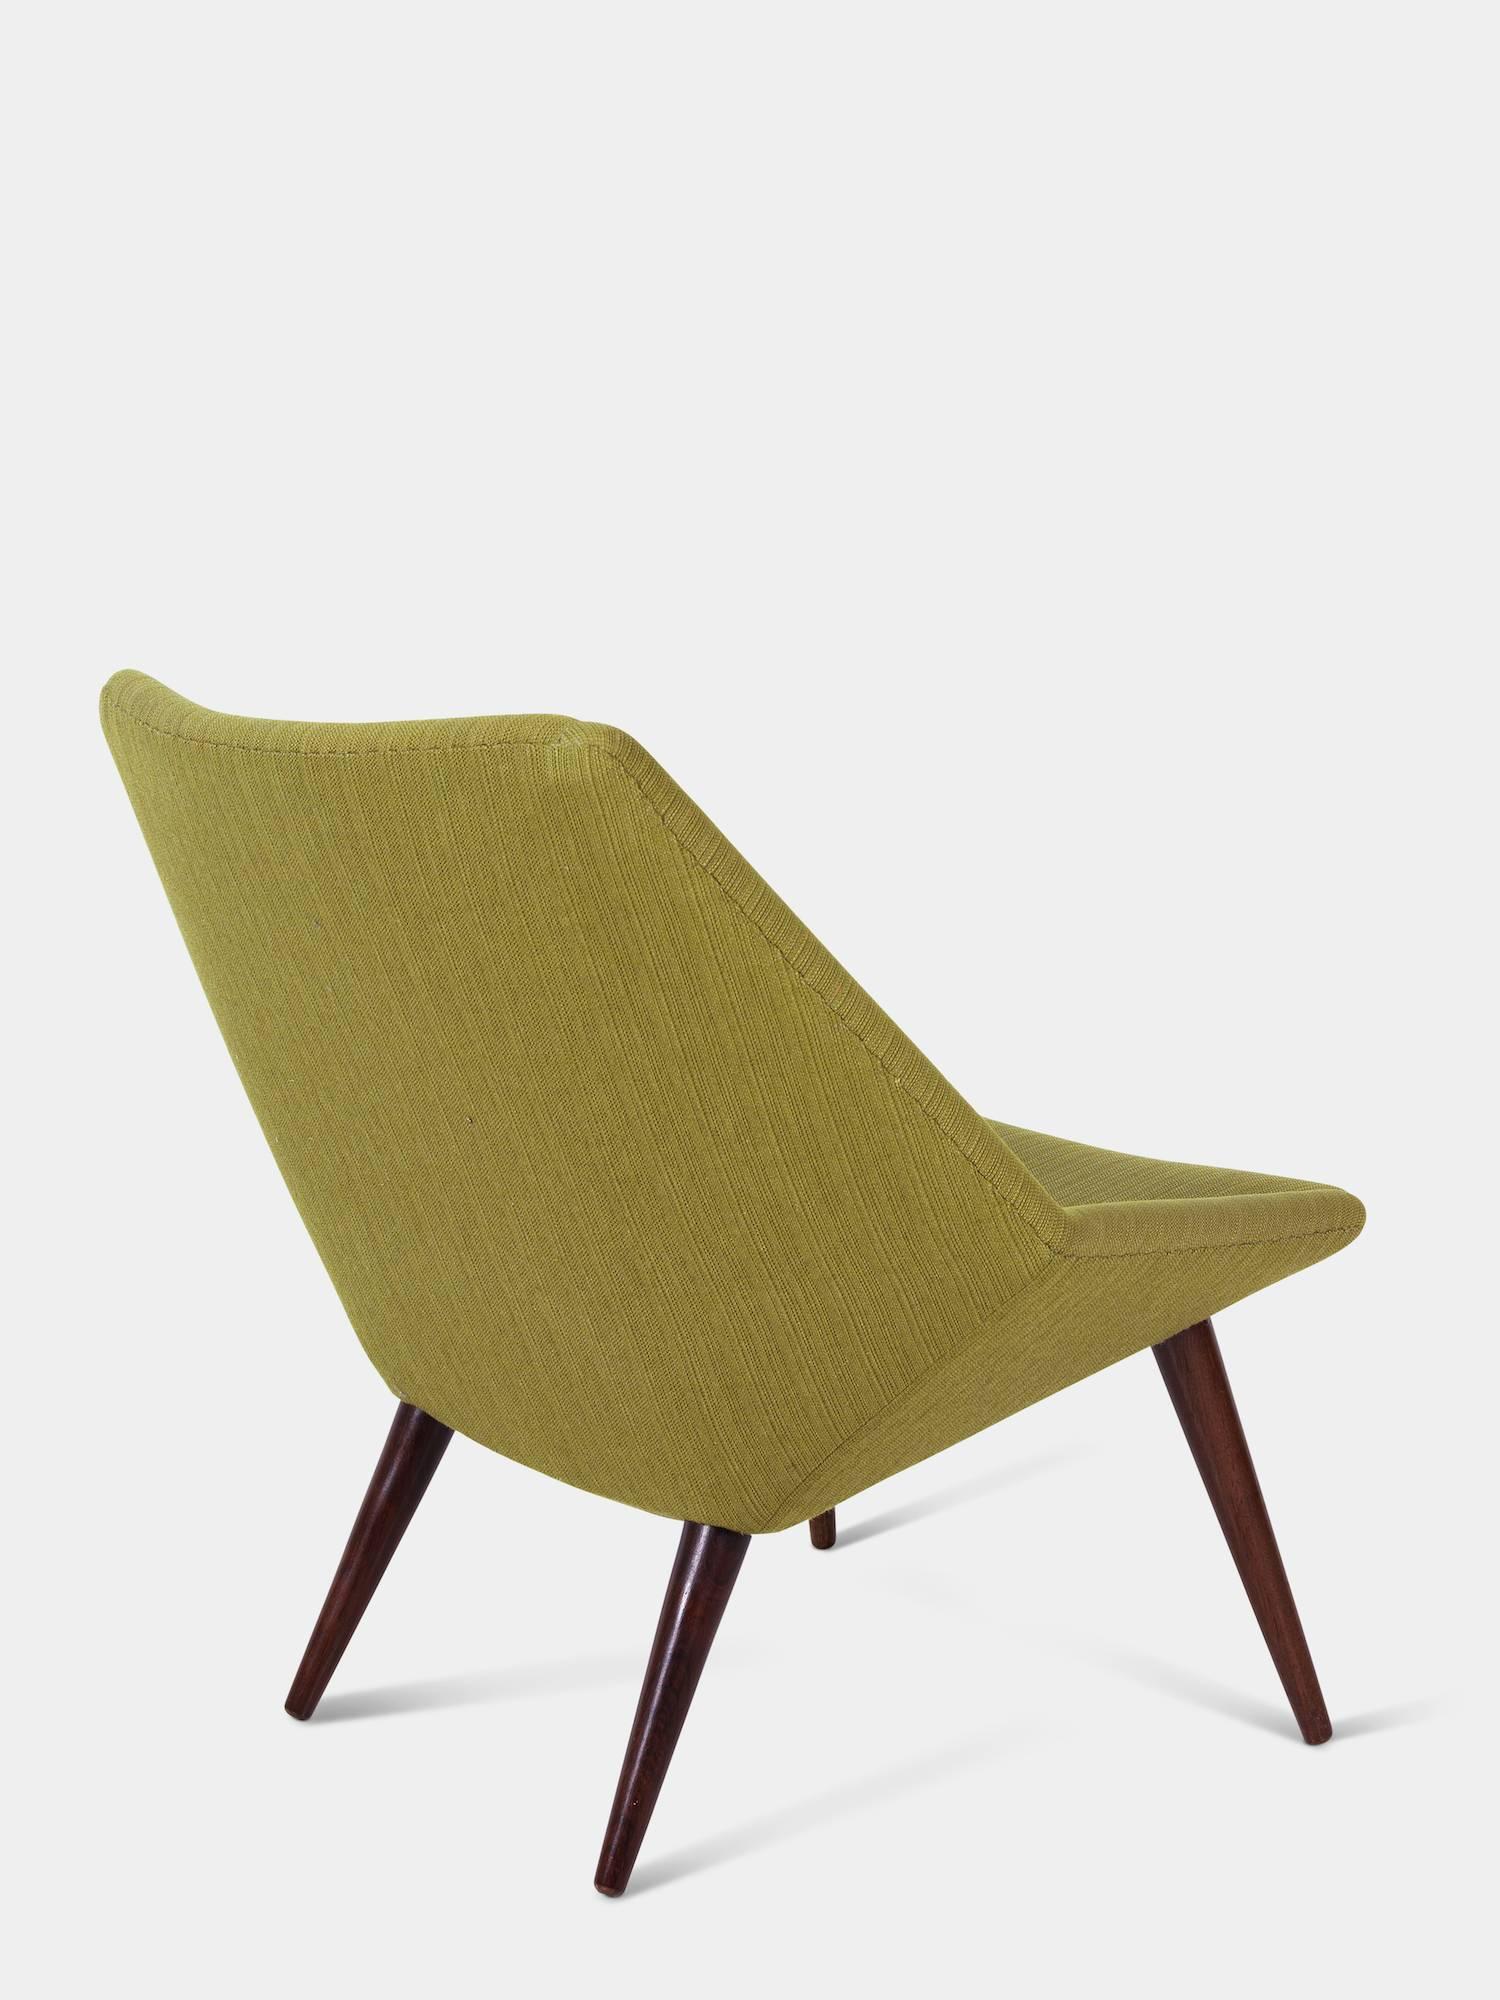 Danish mid-century modern Lounge Chair by Nanna Ditzel In Excellent Condition For Sale In Copenhagen, DK